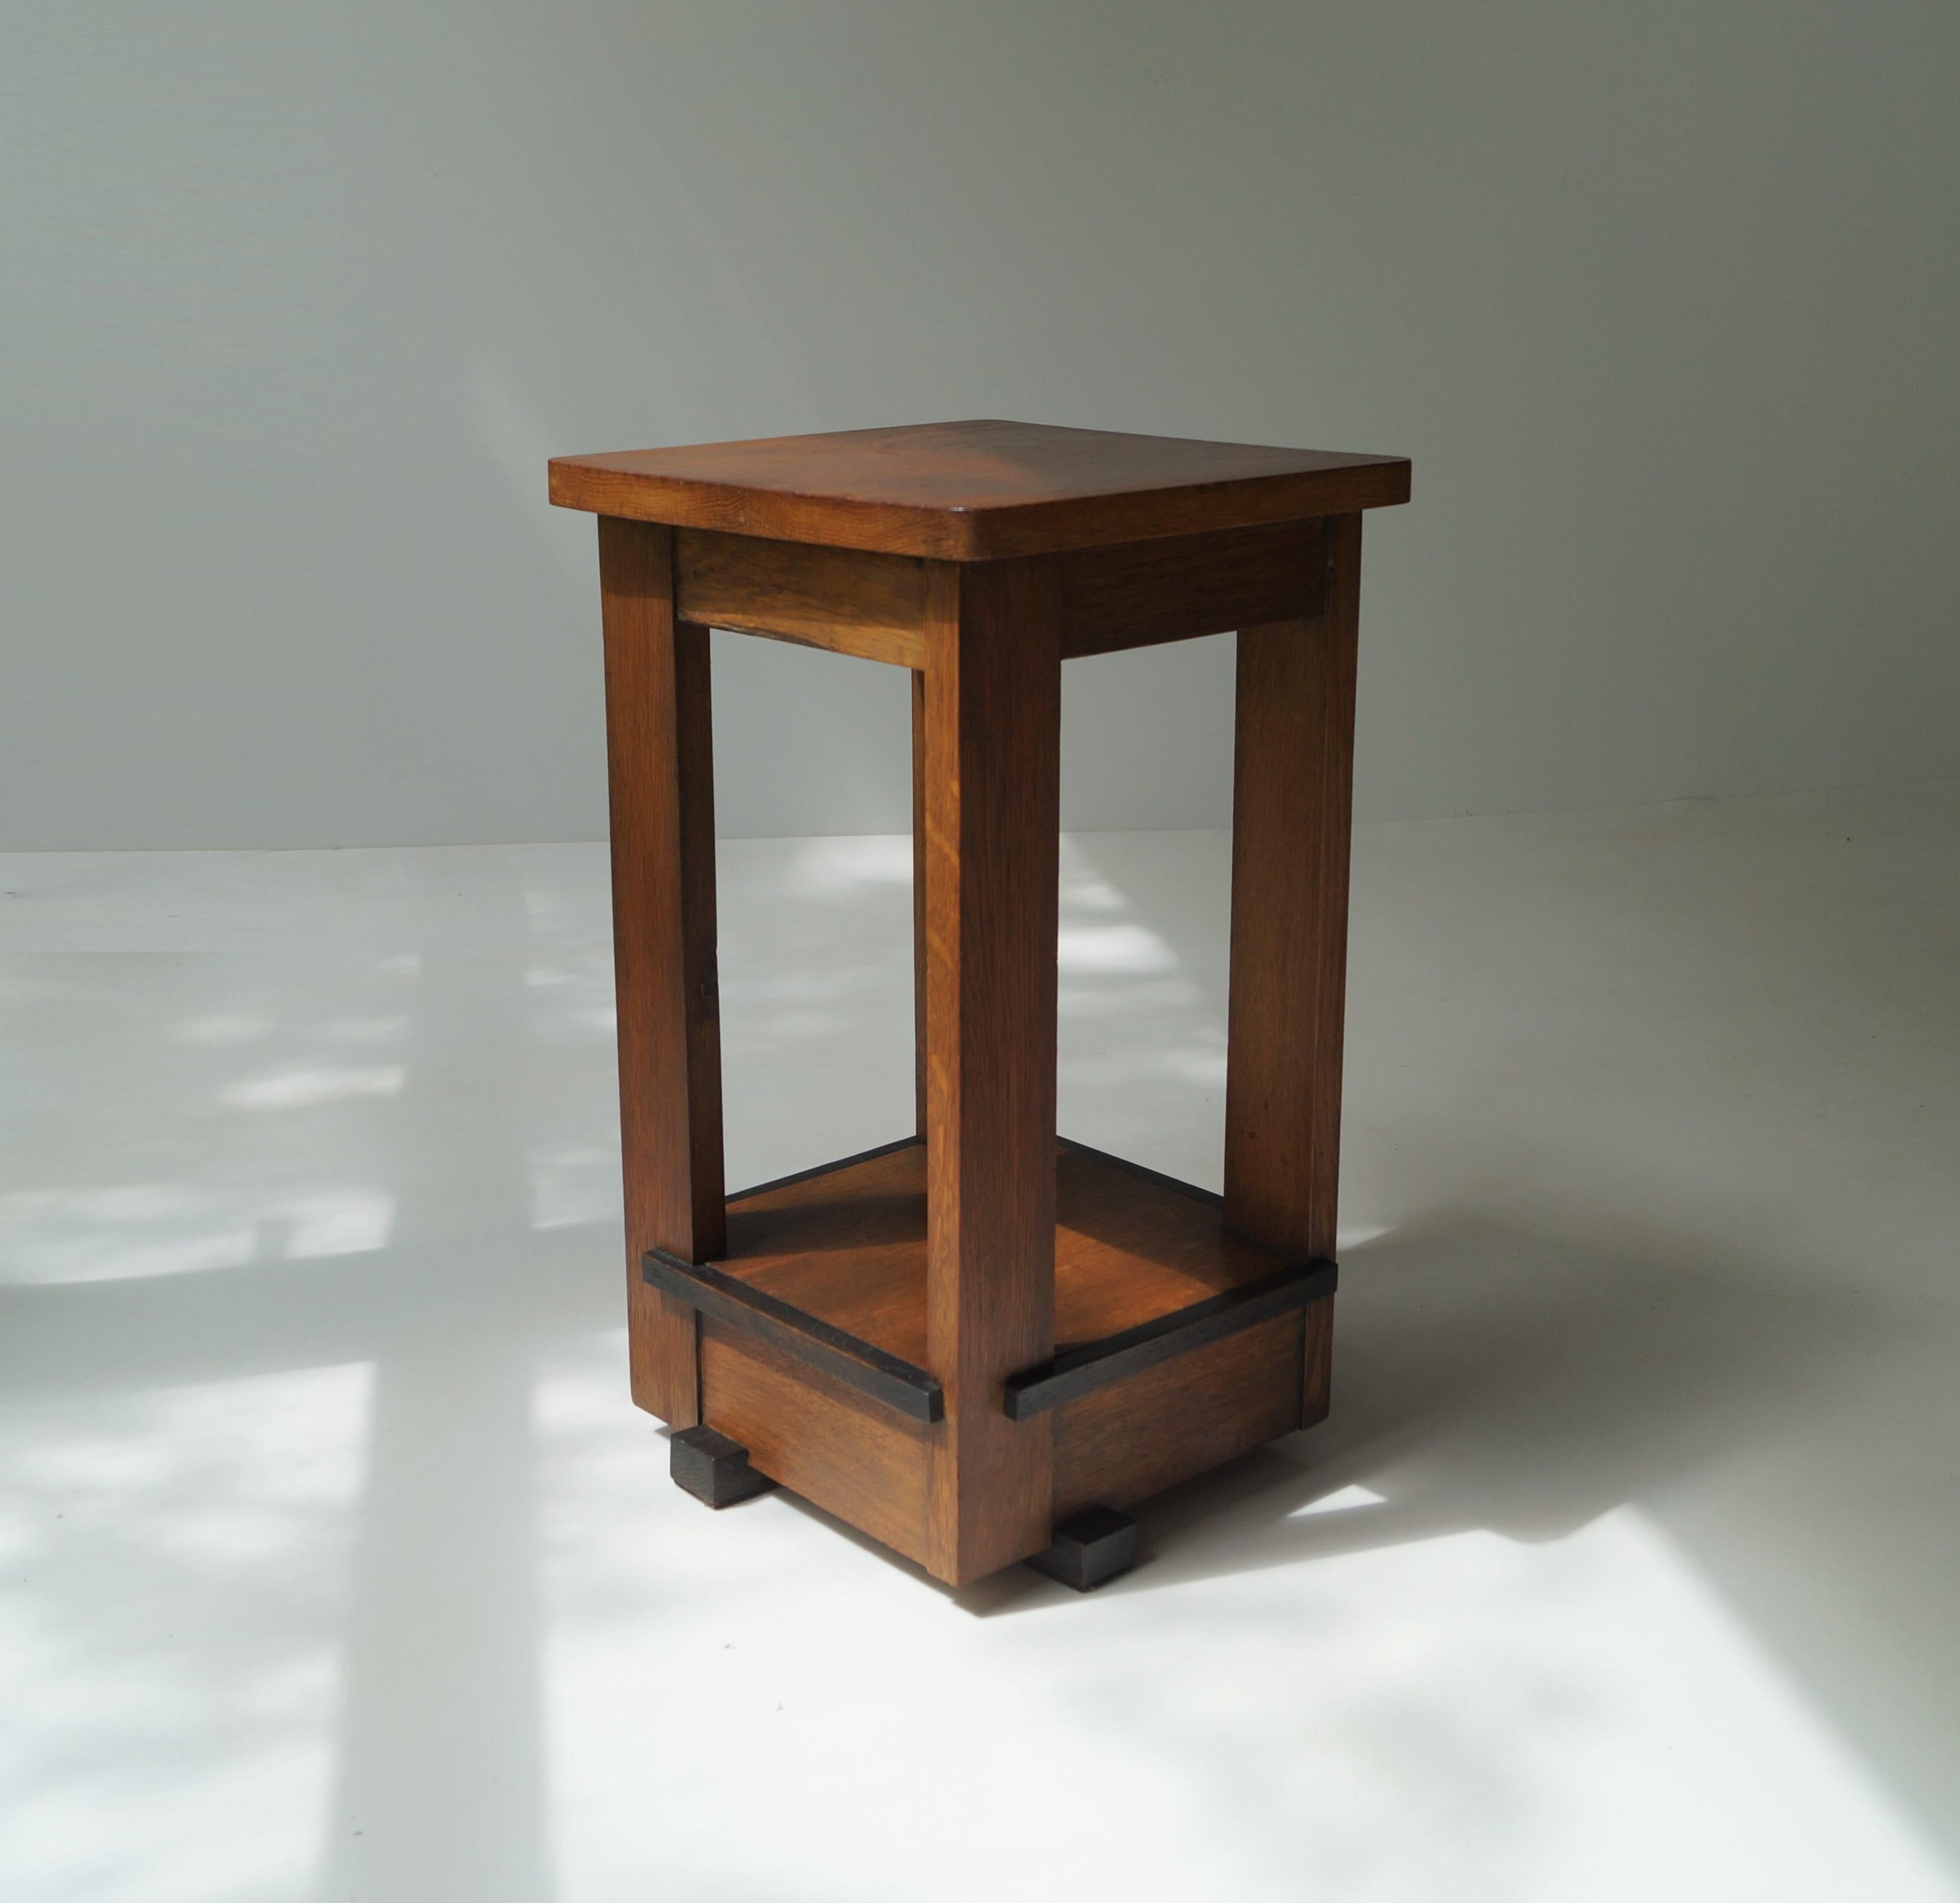 Blackened Dutch Art Deco Haagse School side table attributed to Jan Brunott, 1920s For Sale